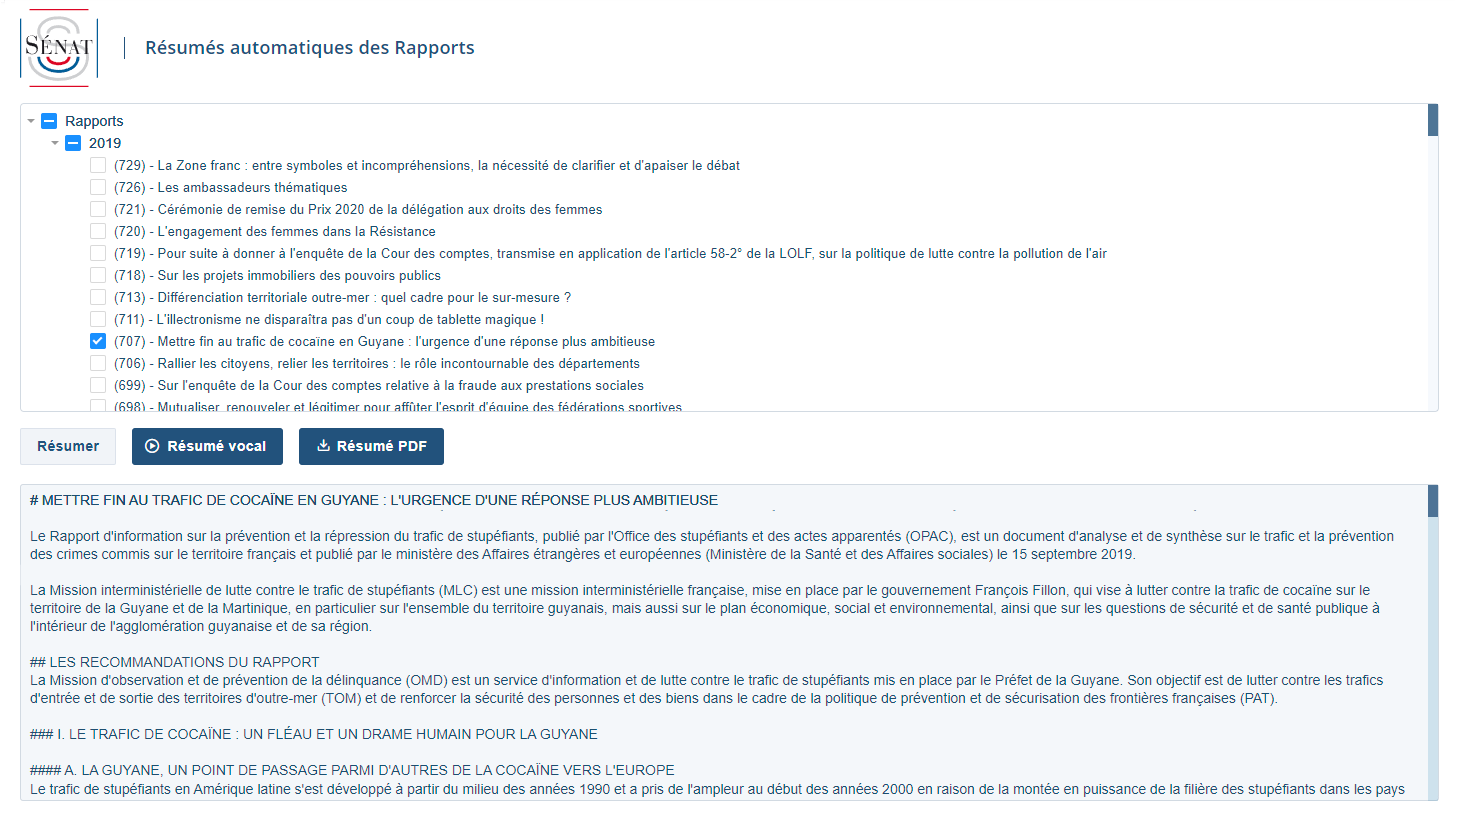 Sénat - Automatic PDF or markdown summaries for pages-long official Reports from the French Senate.